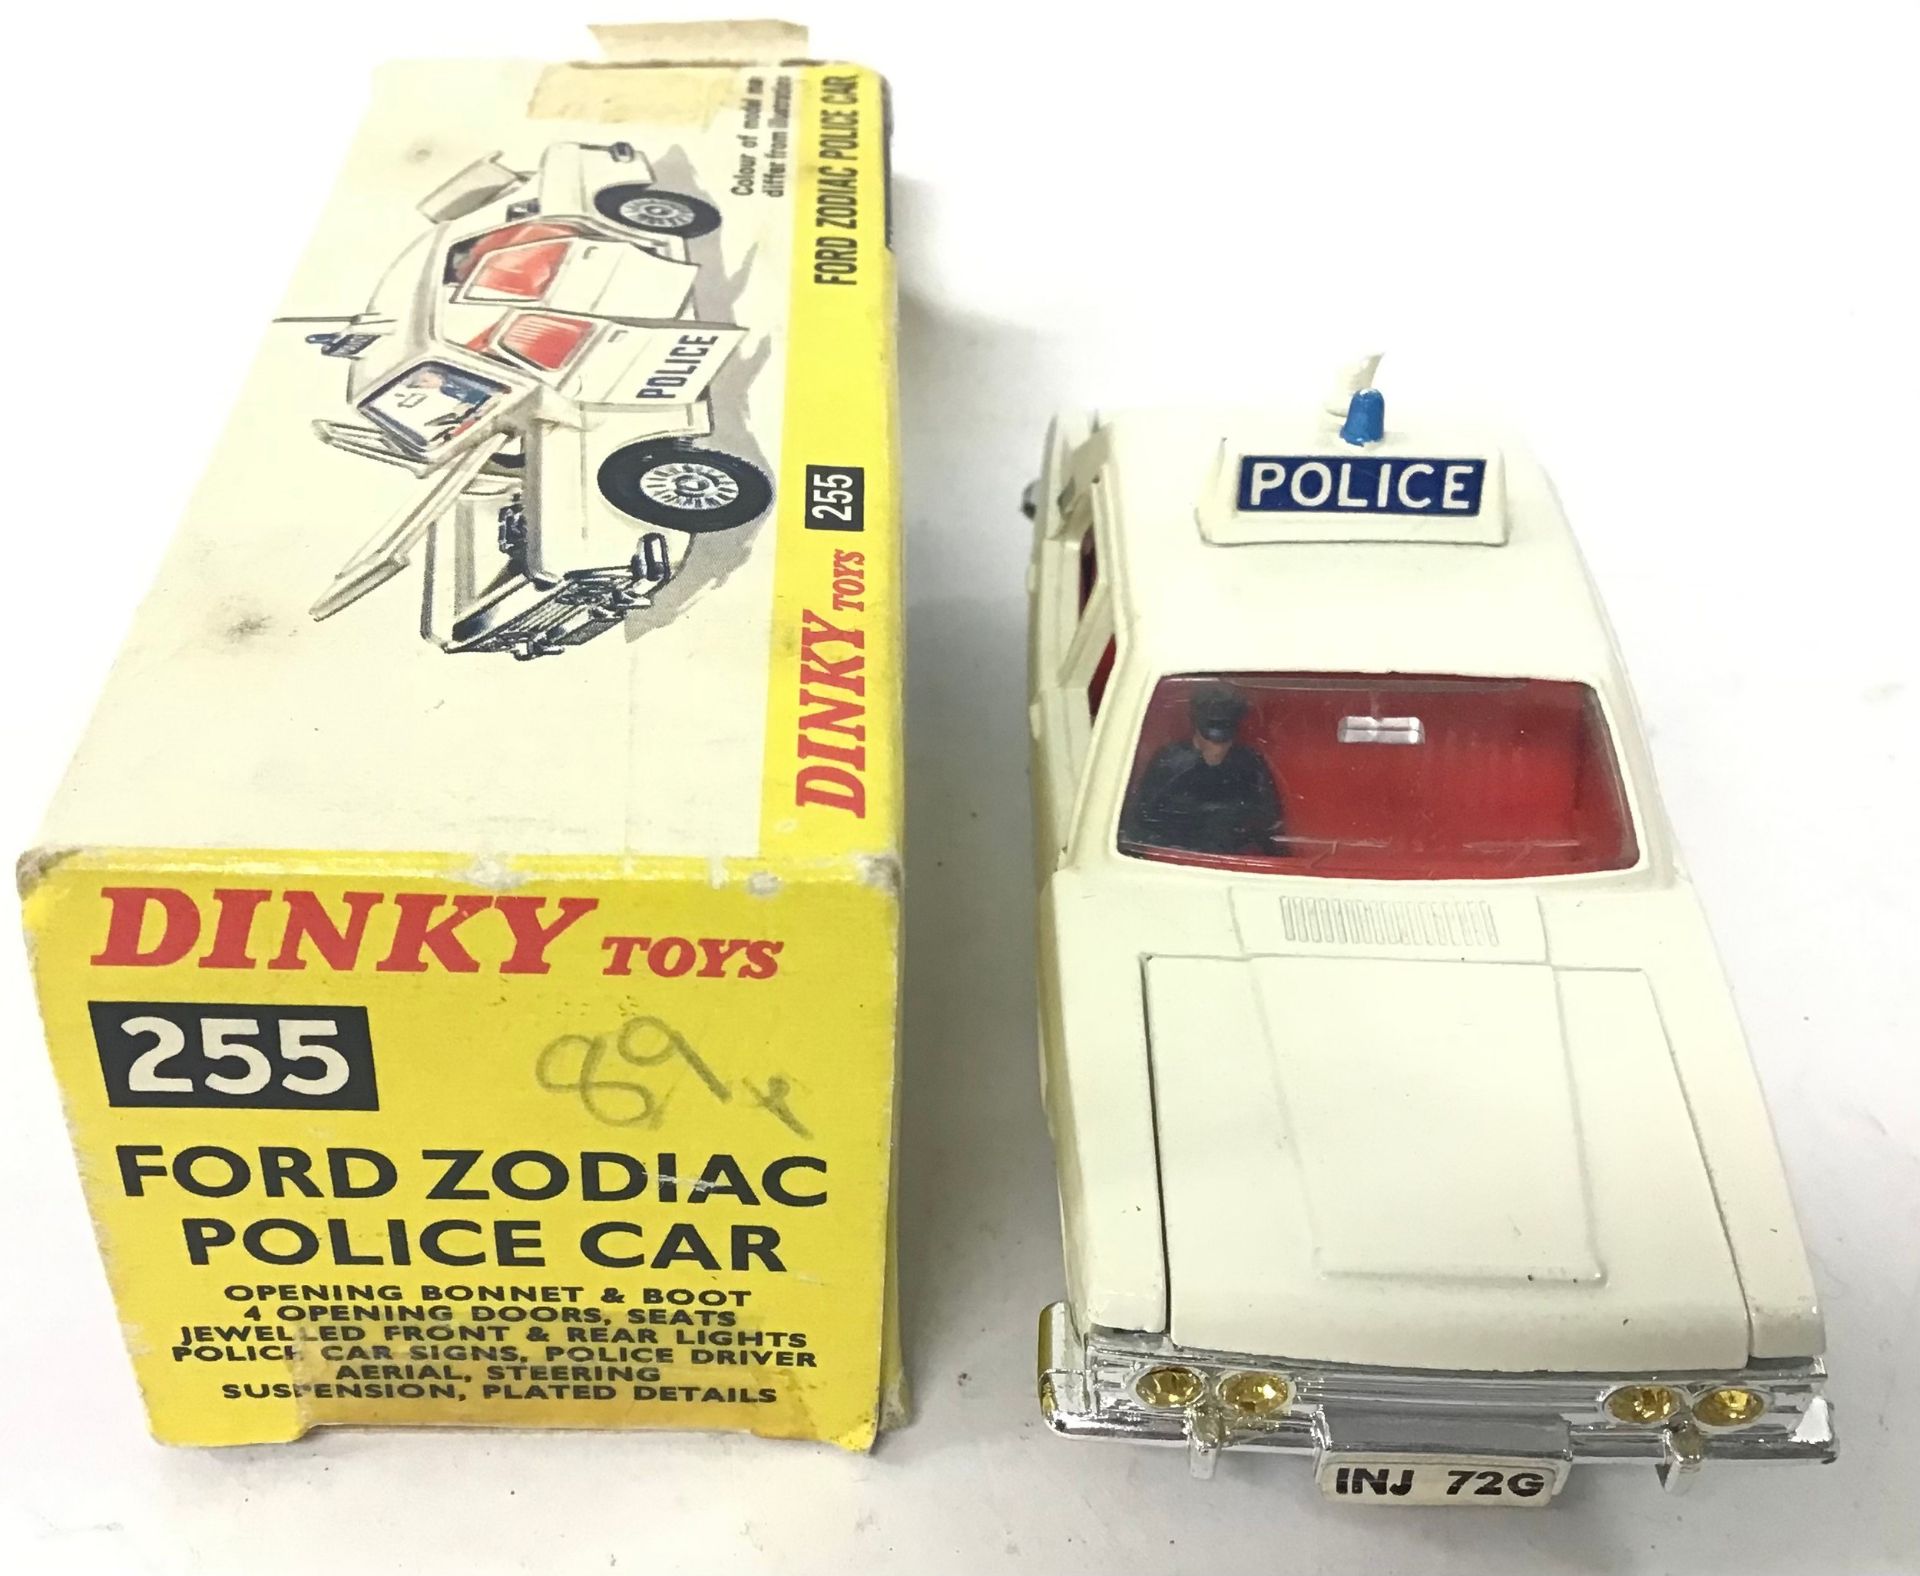 2 Dinky Models: 255 Ford Zodiac "Police" Car - off-white, red interior with figure driver, chrome - Image 2 of 4